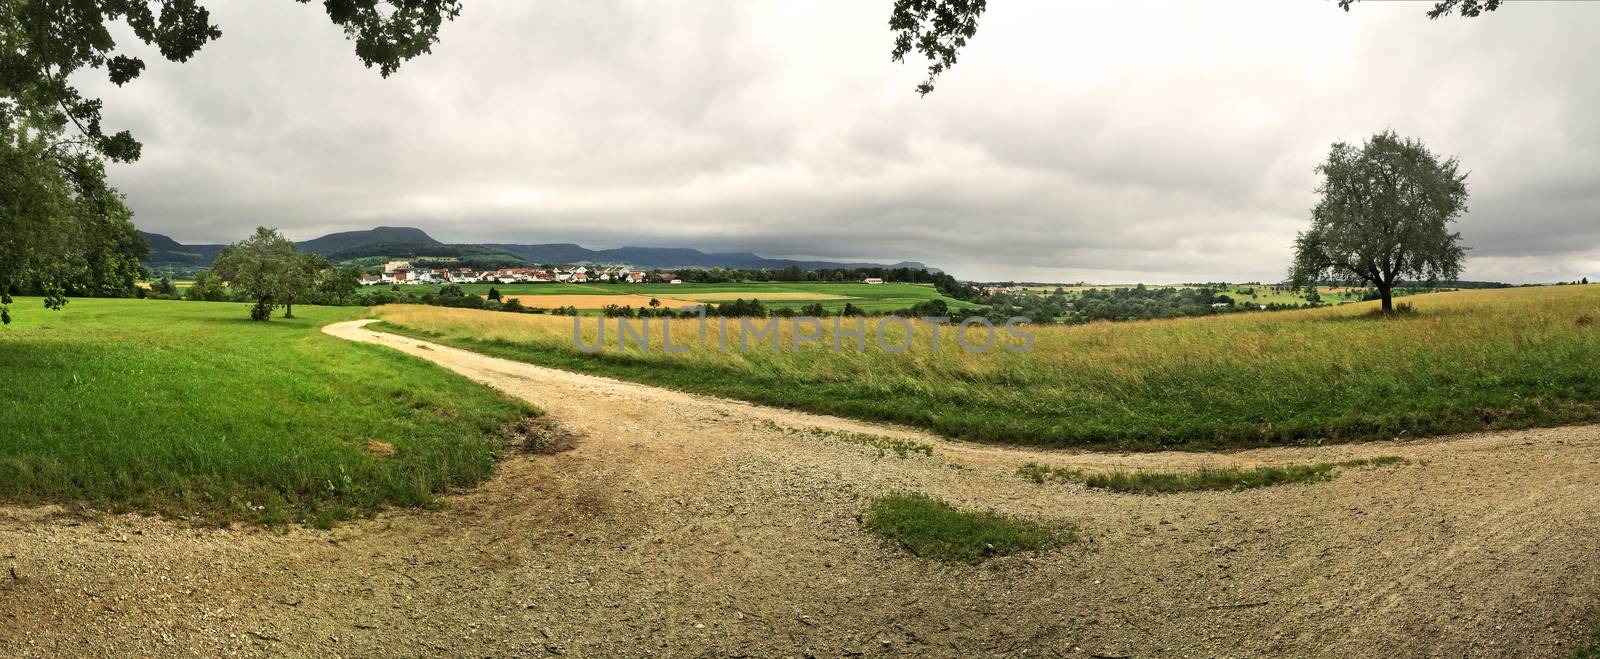 panoramic view to the Swabian highlands in Germany by Jochen